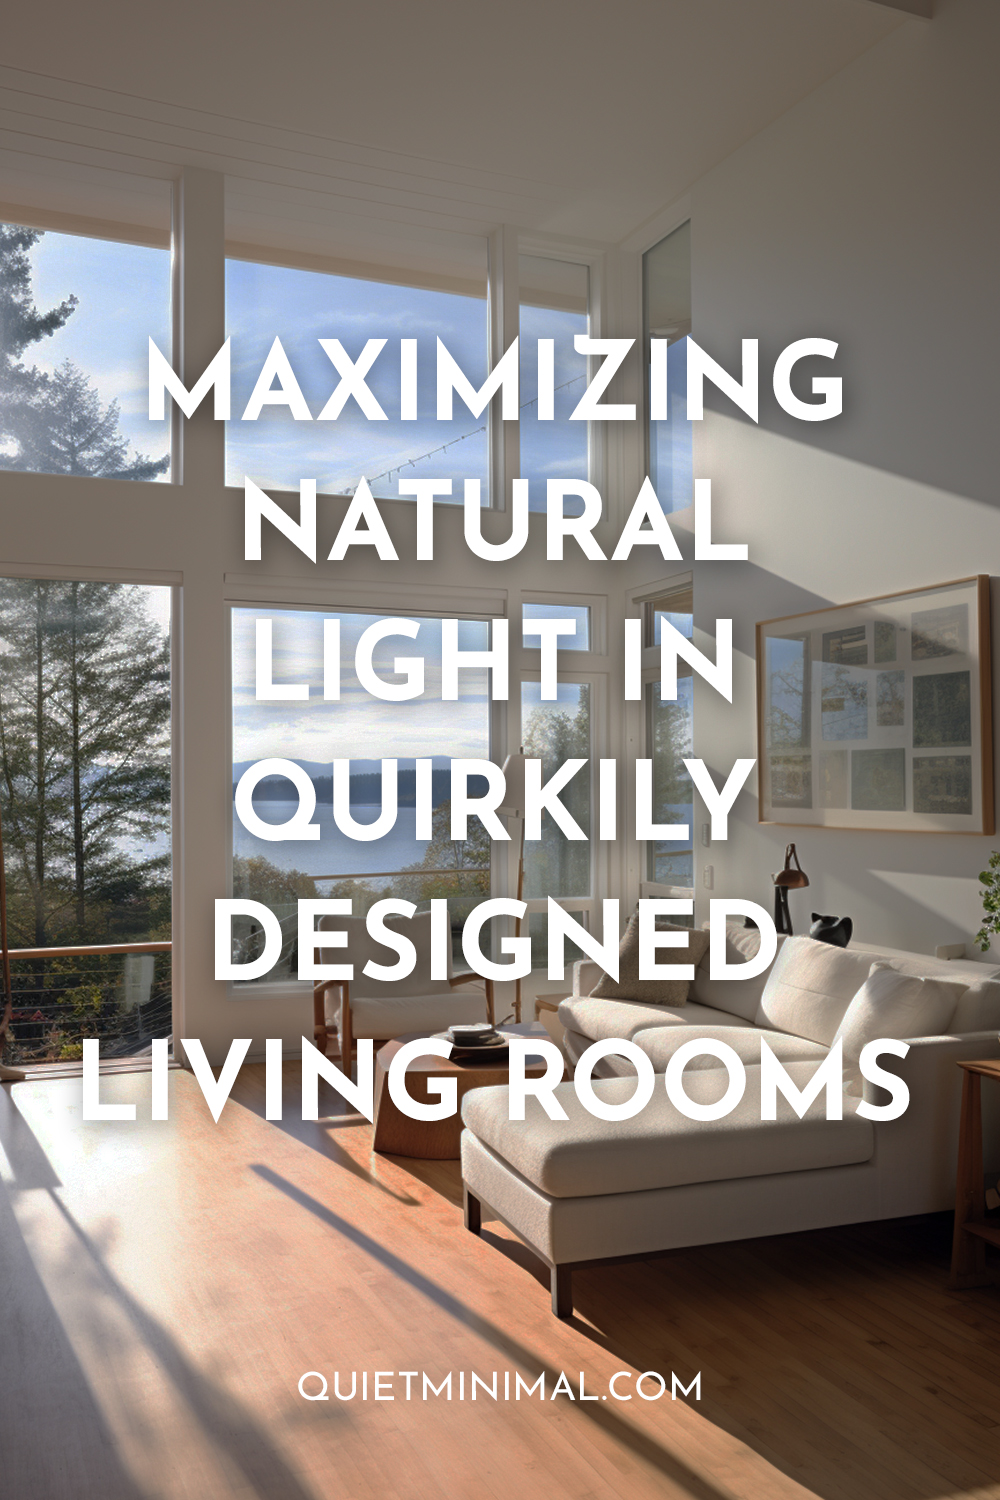 Designing living rooms to maximize natural light.